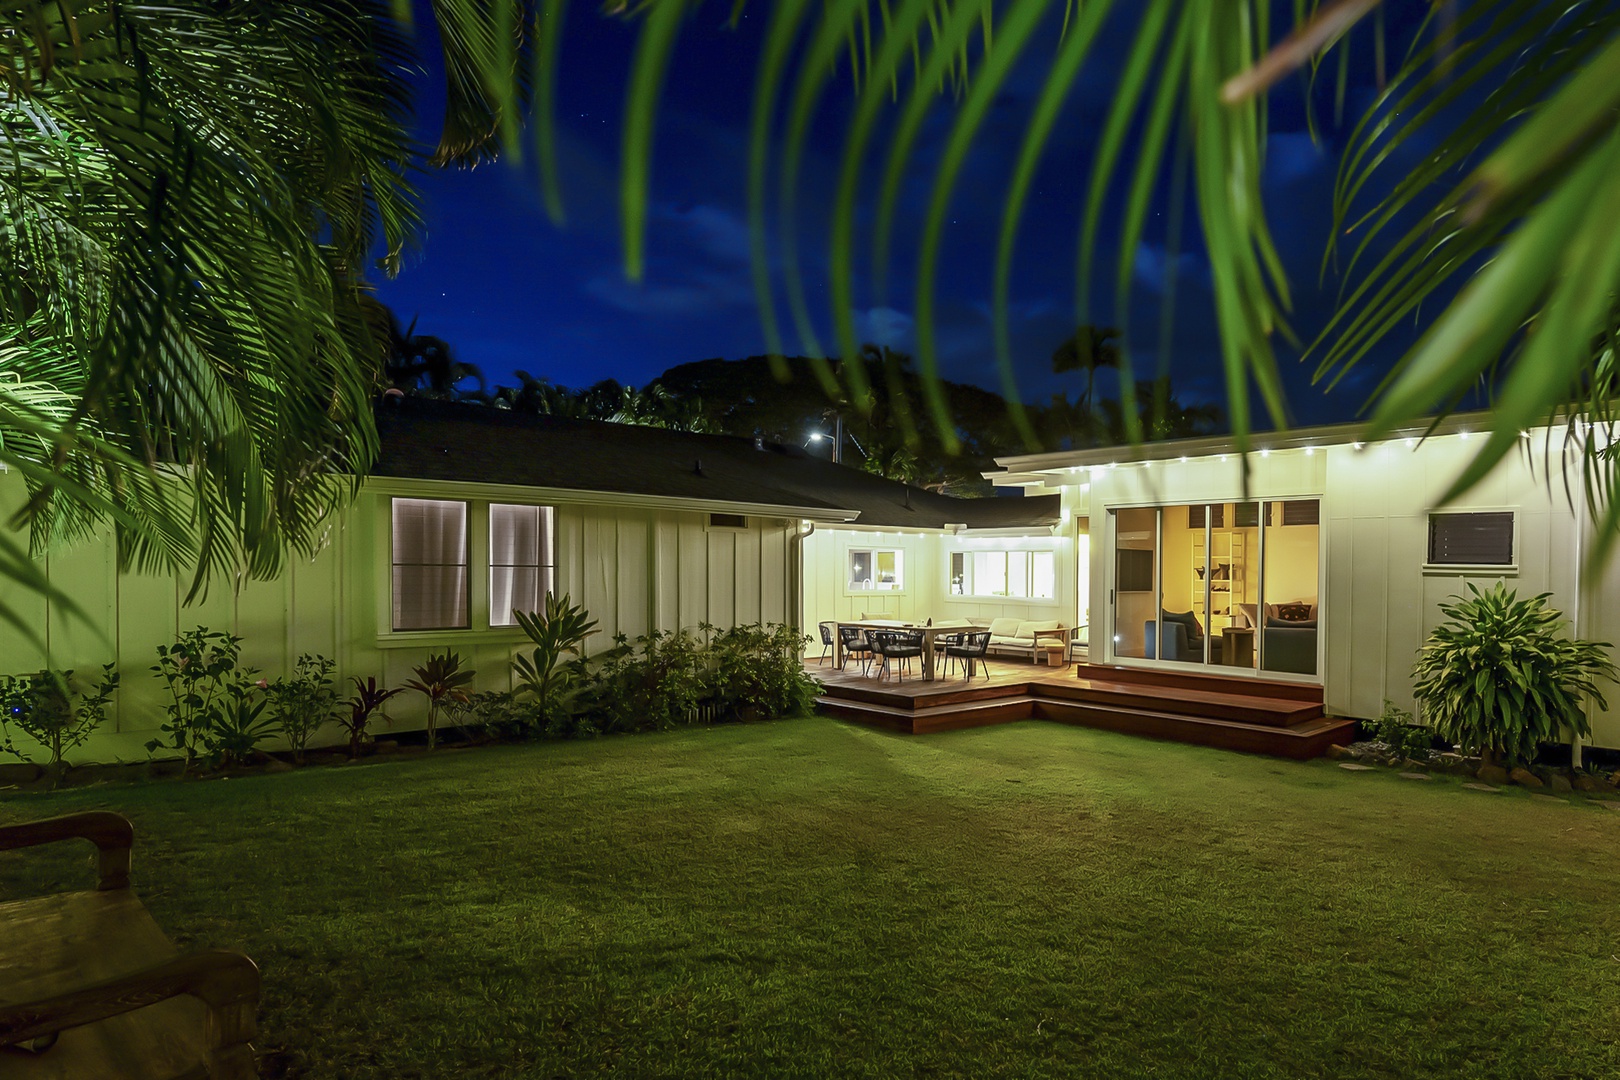 Kailua Vacation Rentals, Lanikai Ola Nani - A perfect spot for nightly celebrations with family, or friends. Shared moments of simple gatherings and celebrations are timeless treasures.